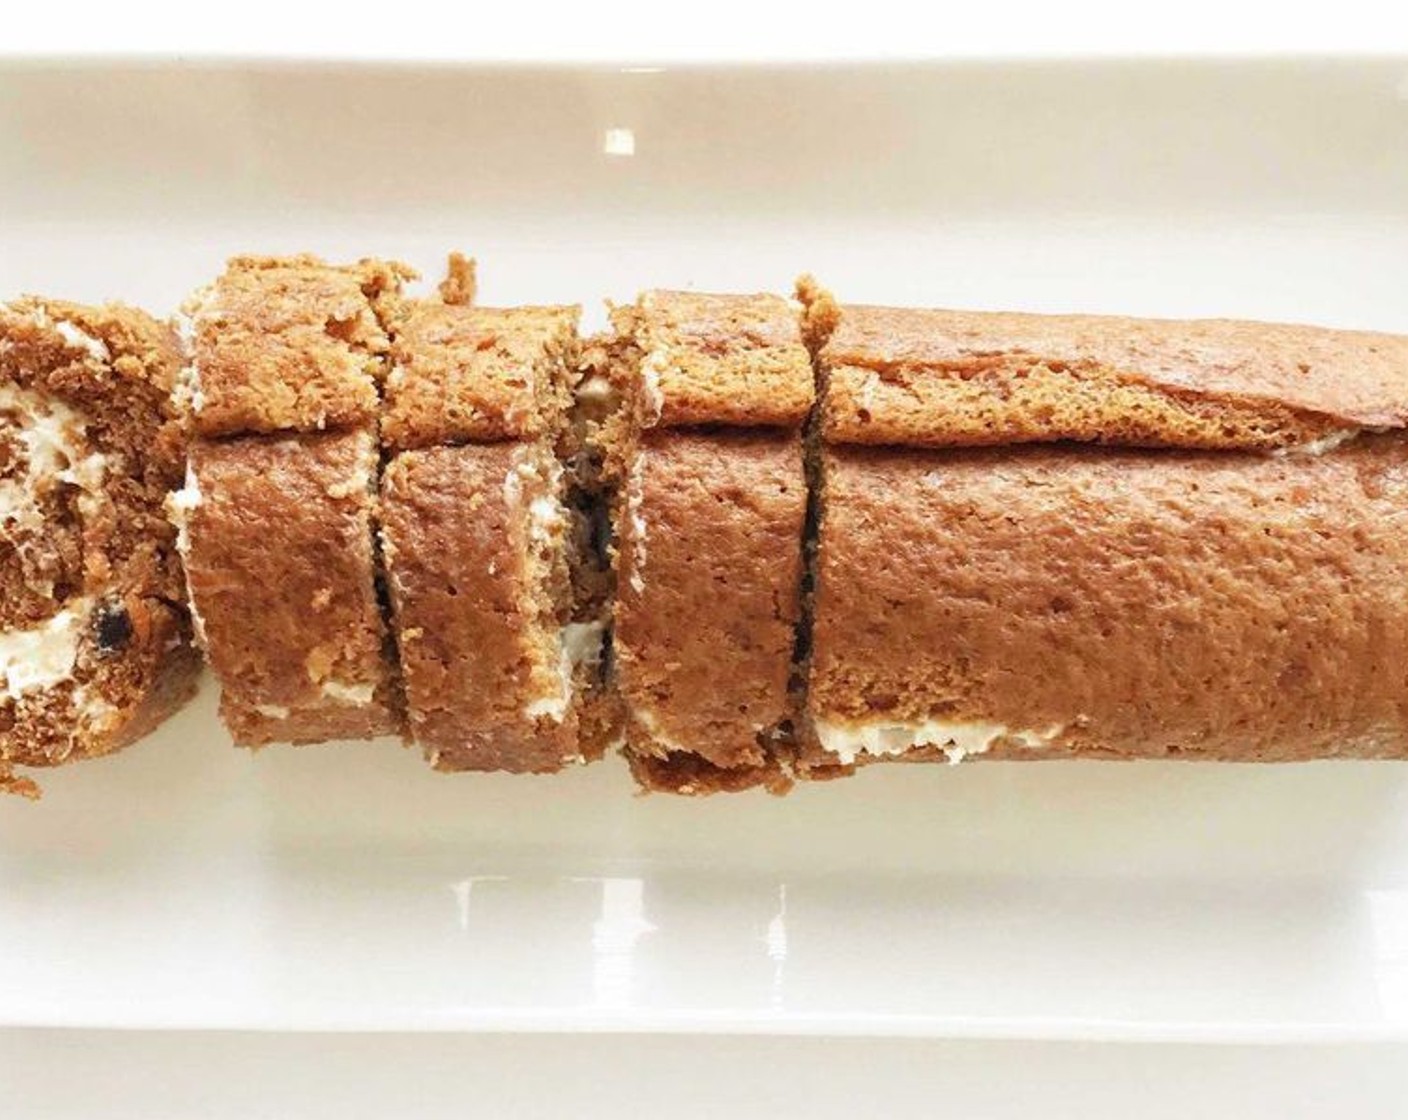 Skinny Carrot Cake Roll with Cream Cheese Filling